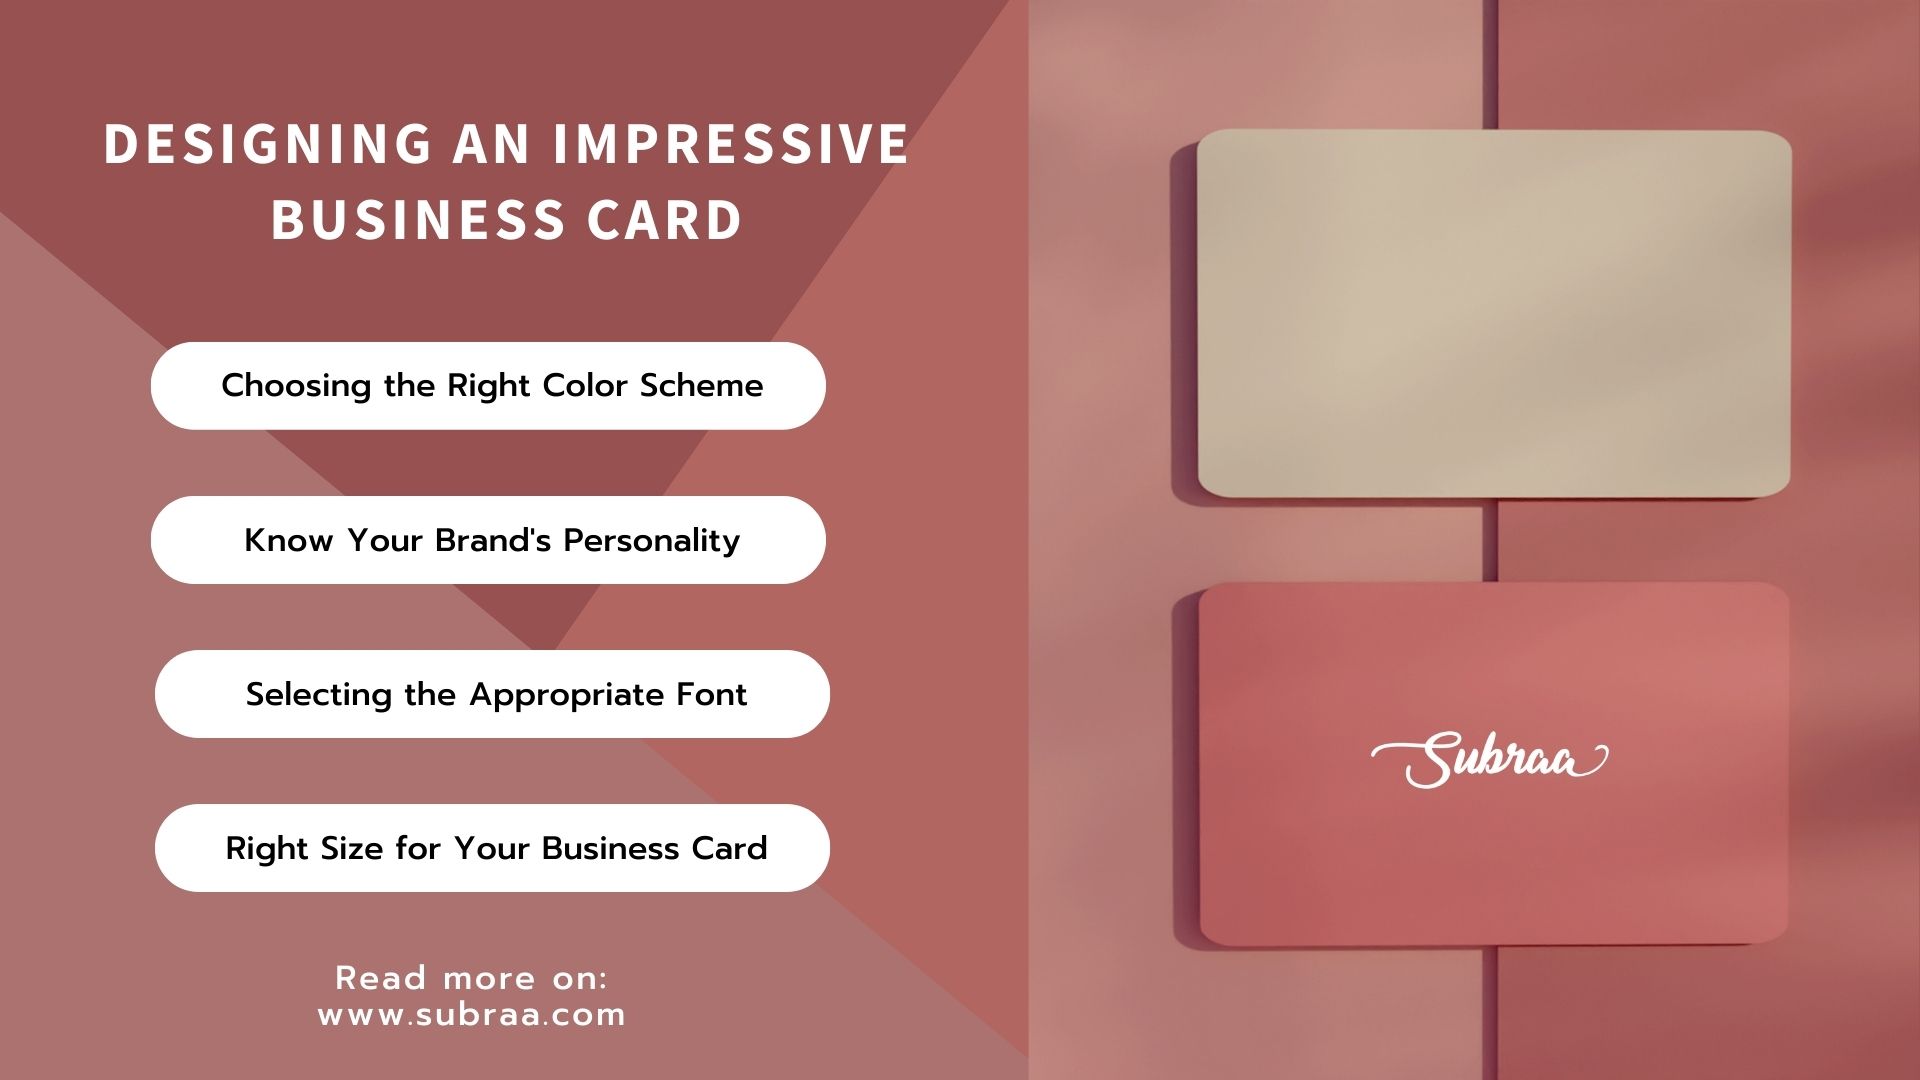 How to design an Impressive Business Card in Singapore